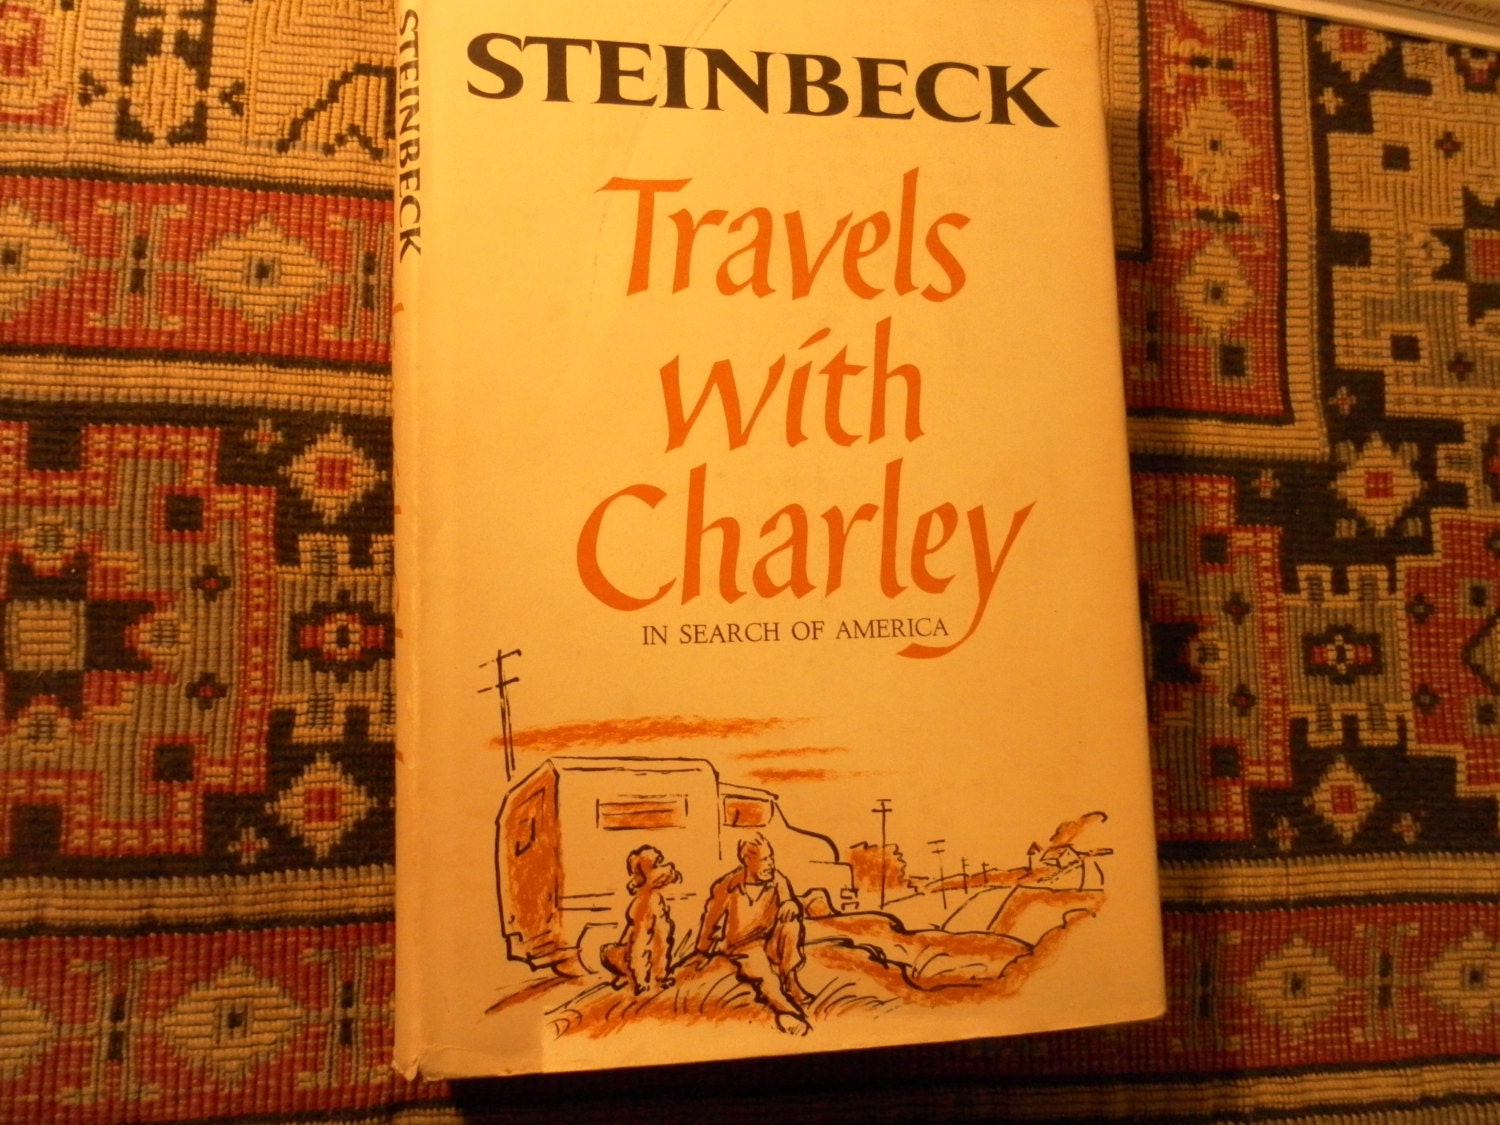 john steinbeck my travels with charley